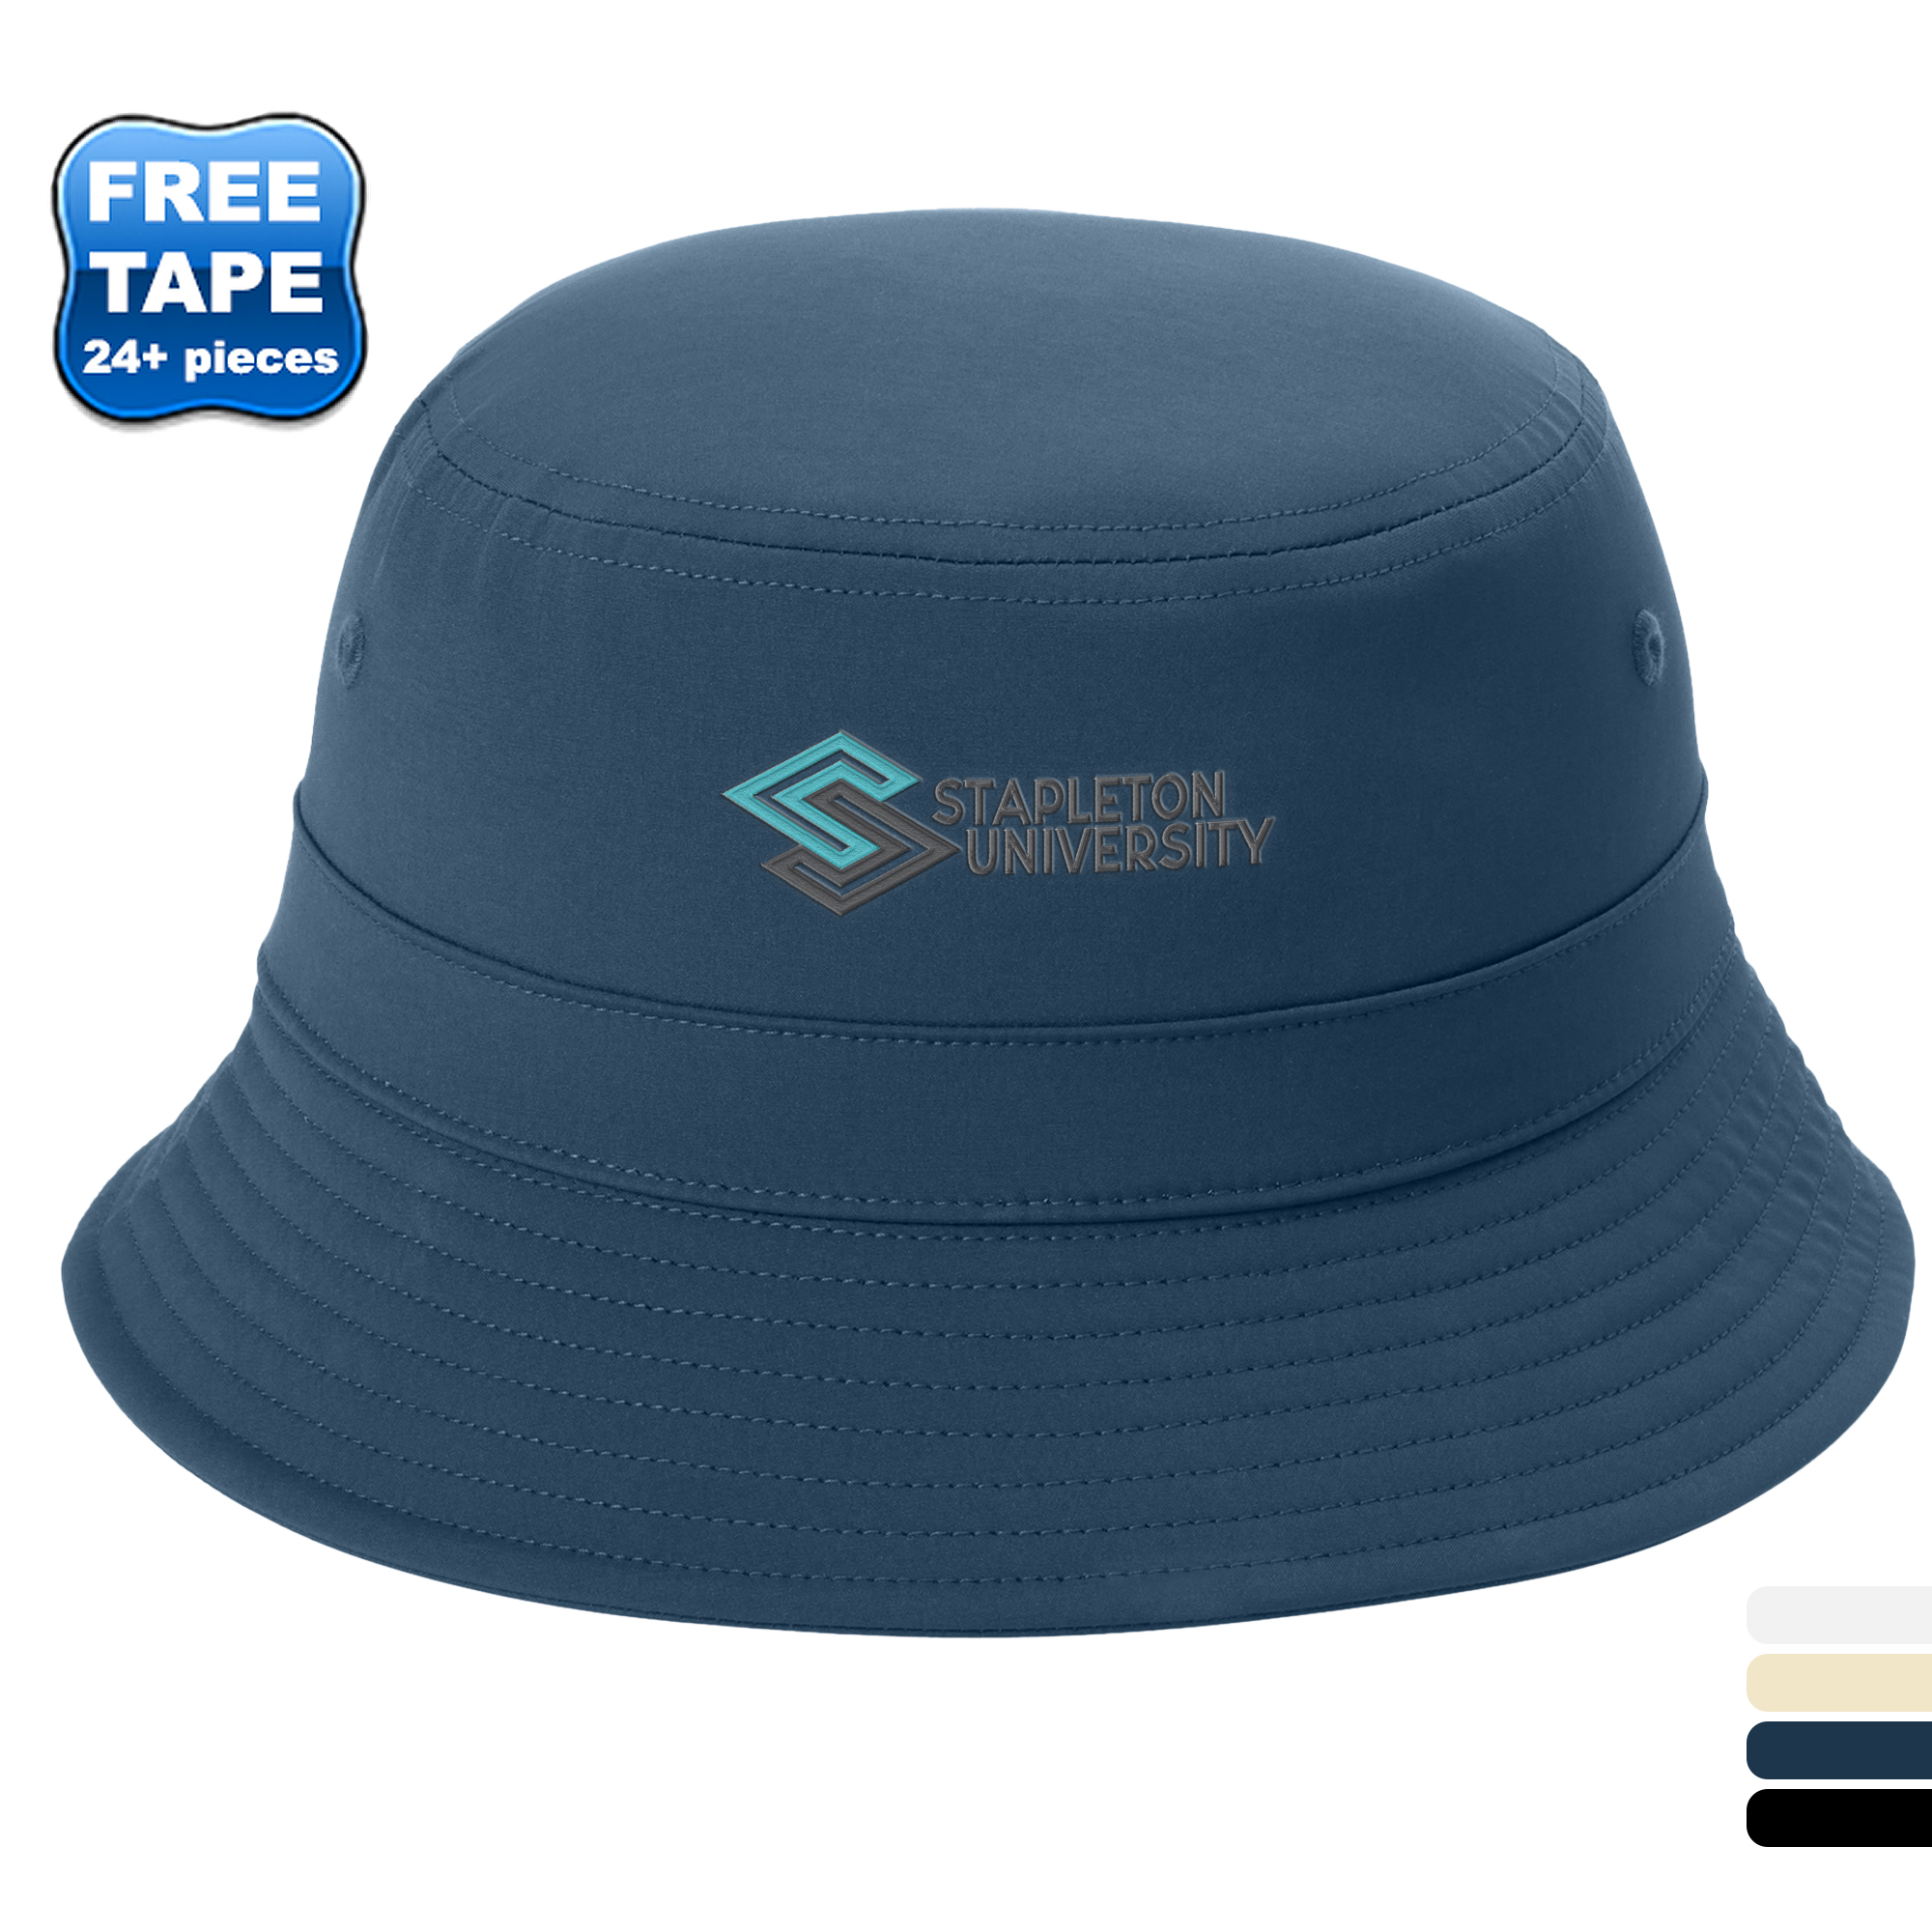 Visors & Summer Hats by Fire & Public Safety Awareness Promotional